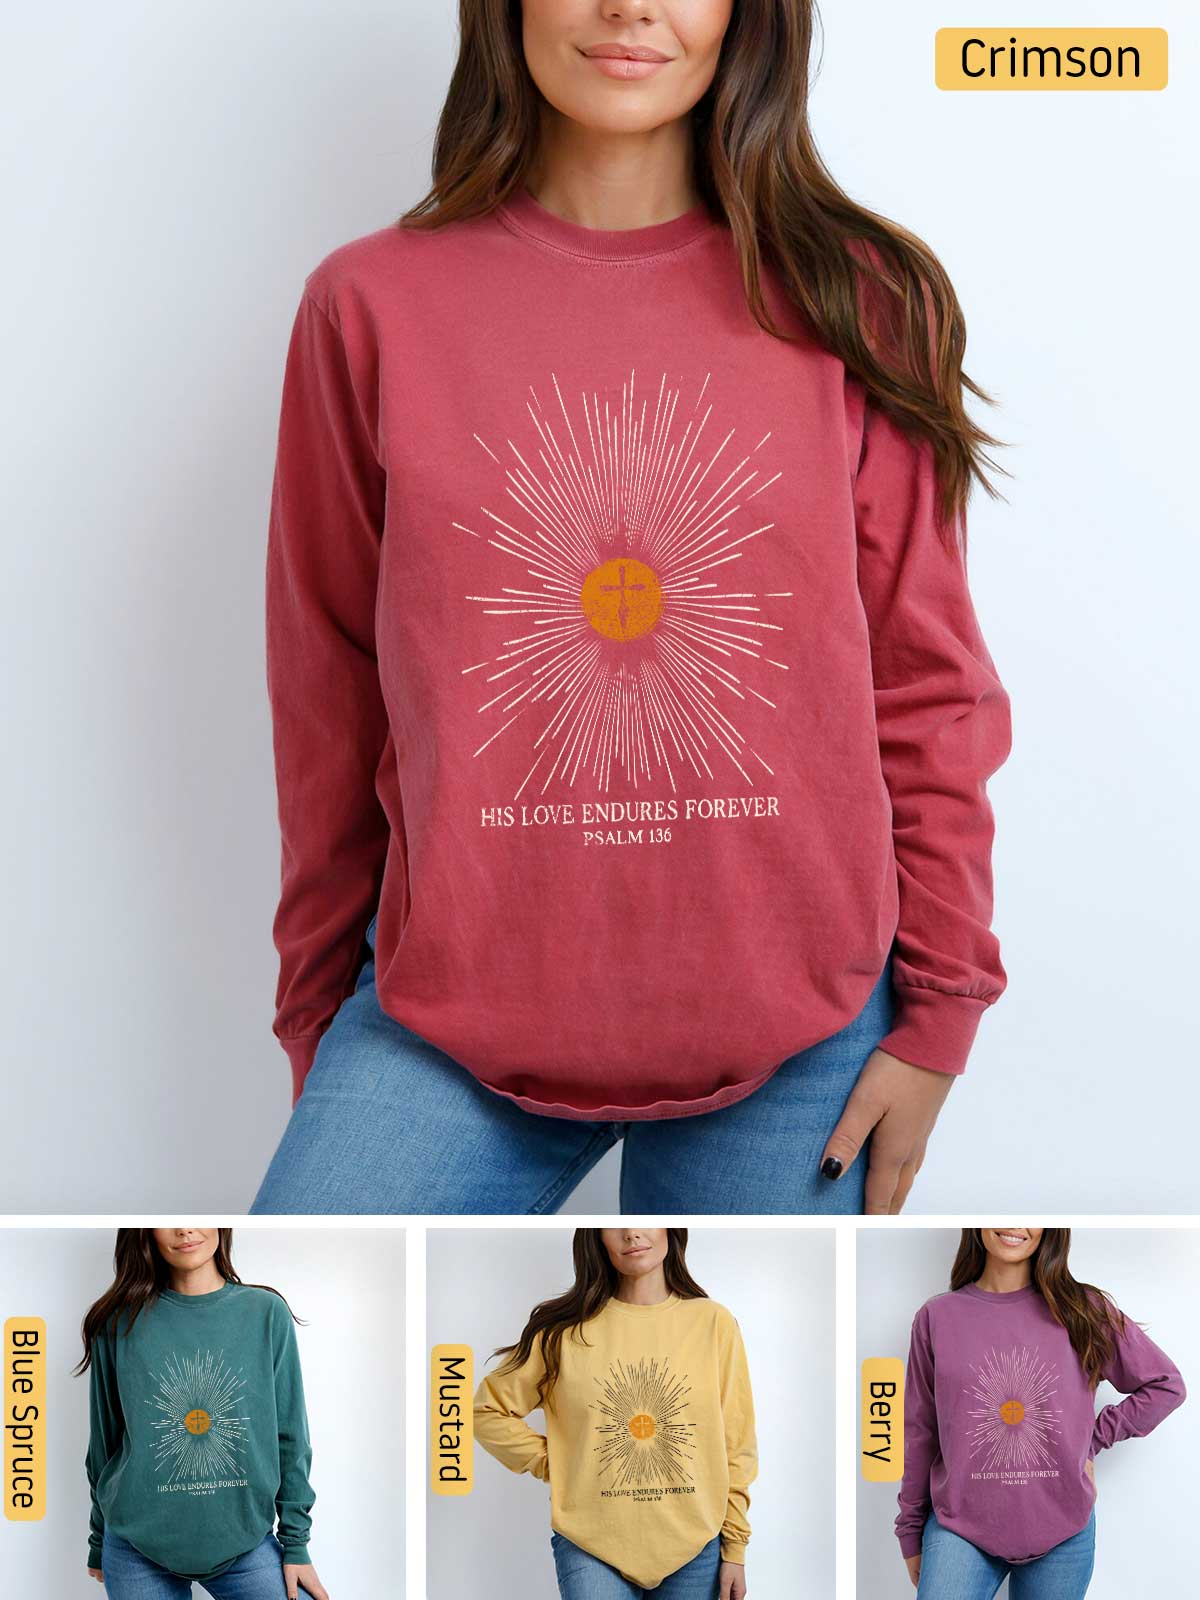 a woman wearing a red sweatshirt with a sun graphic on it